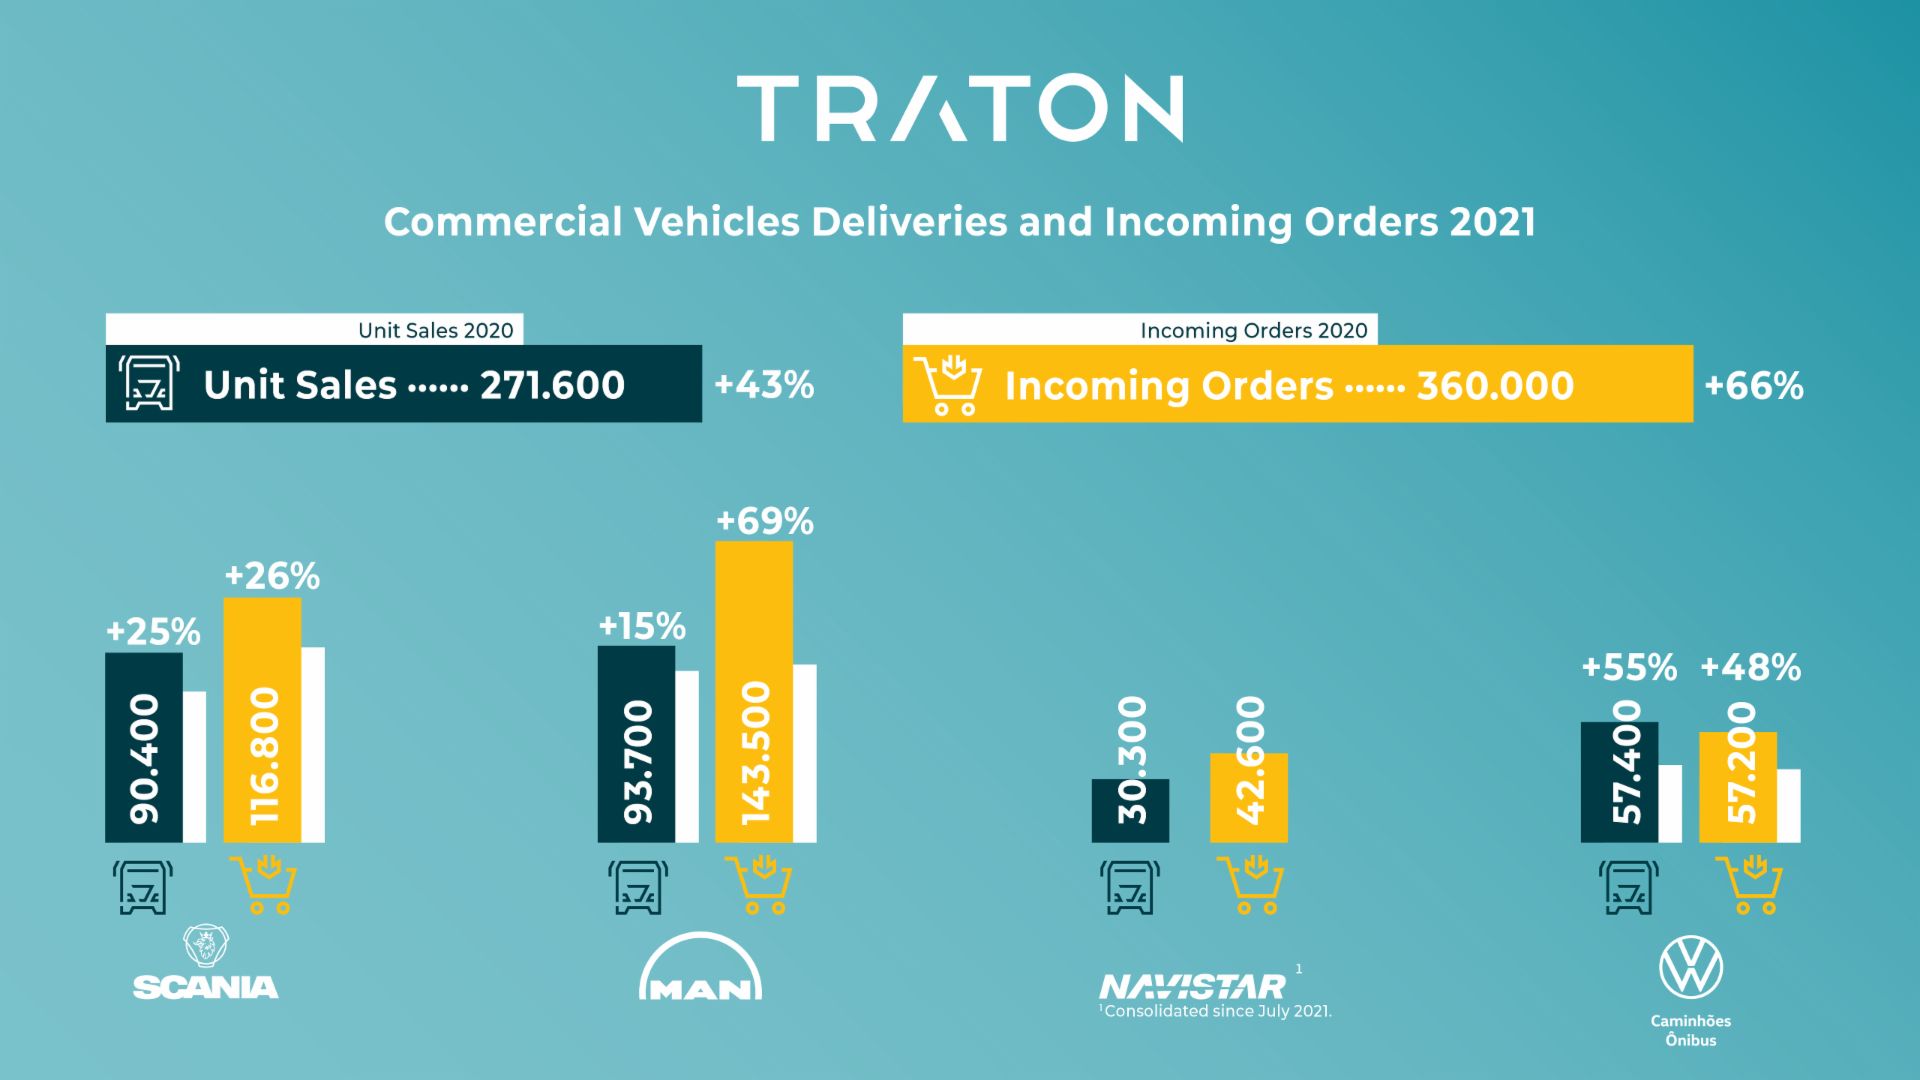 Grafic of Unit Sales & Incoming Orders 2021 TRATON